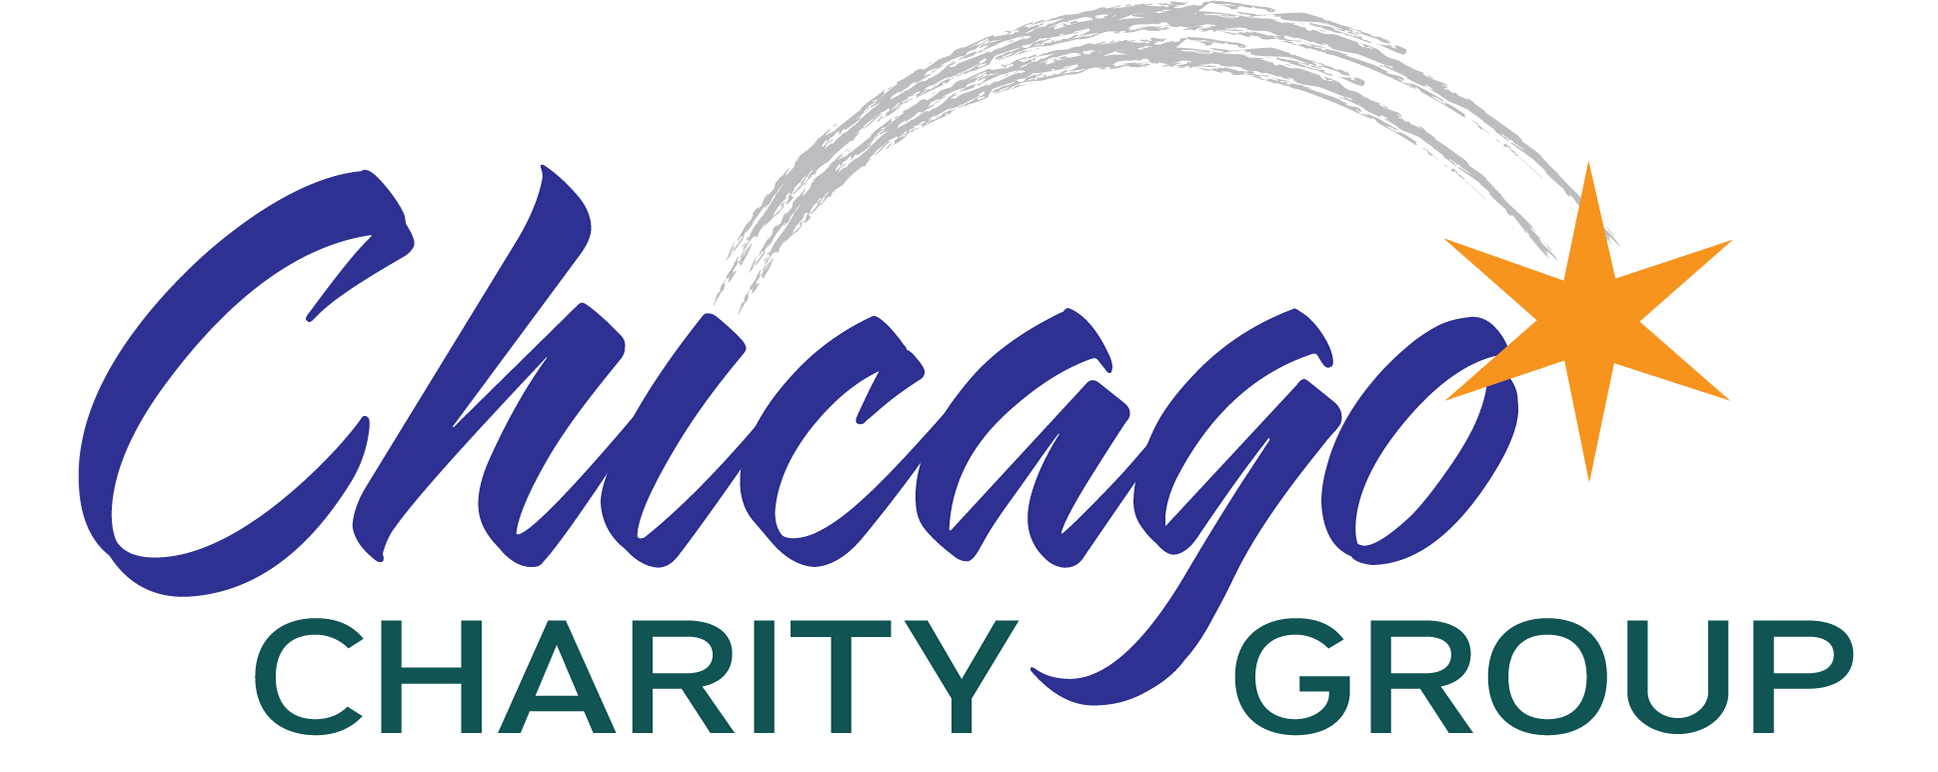 Chicago Charity Group